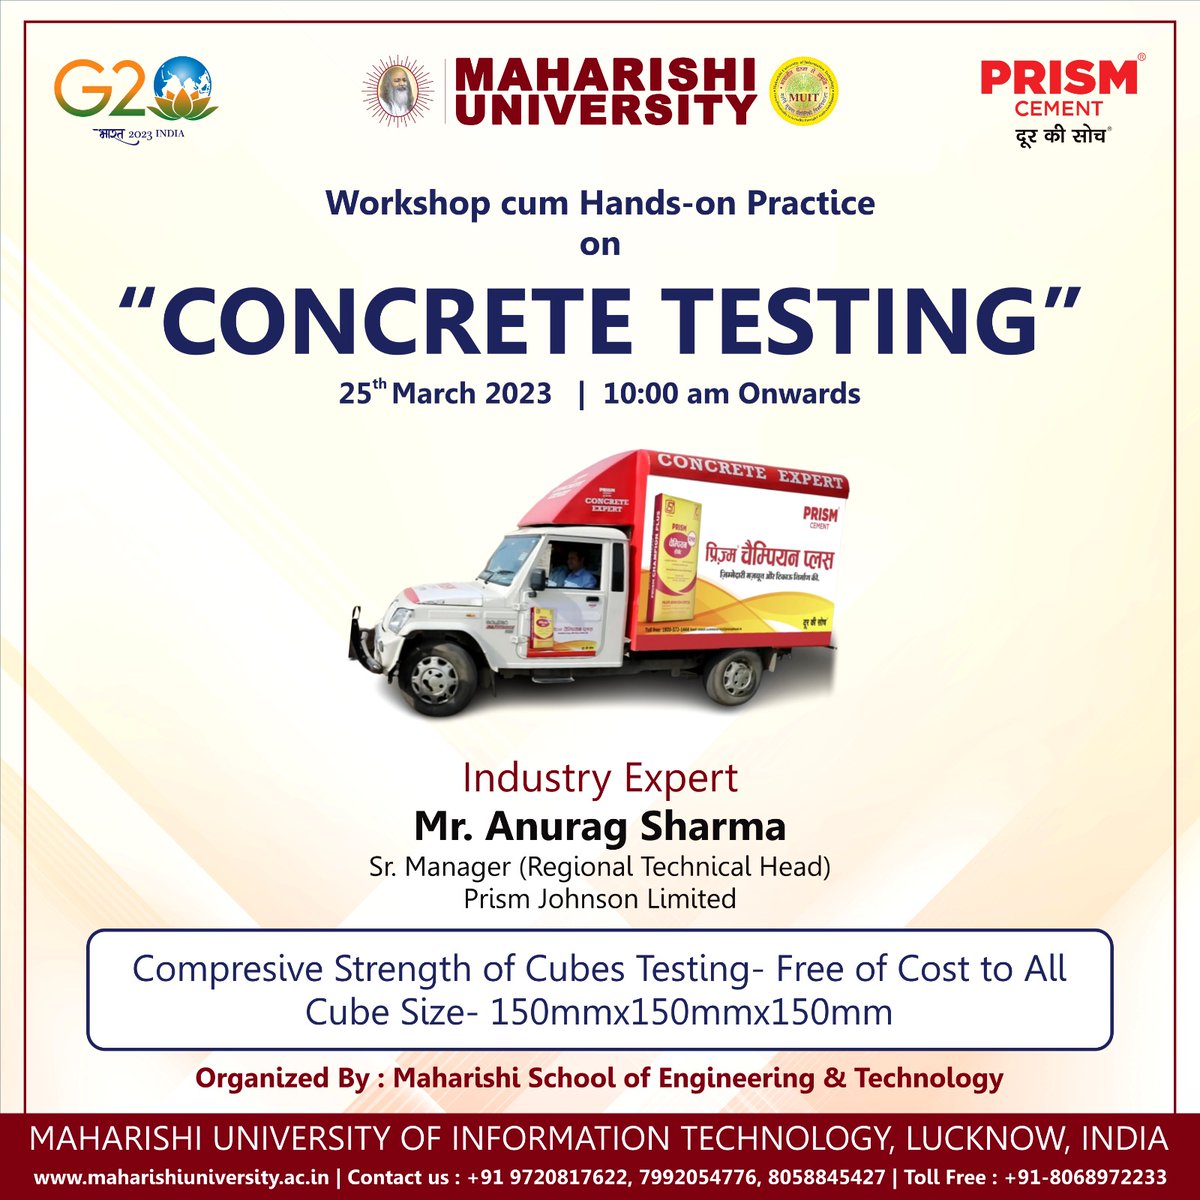 The School of Engineering & Technology at Maharishi University of Information Technology is organising a workshop cum Hands-on Practice on 'Concrete Testing' on 25th March 2023. It's free for all stakeholders.

#MuitIndia #ConcreteTesting #MUIT #workshops2023 #admissions2023